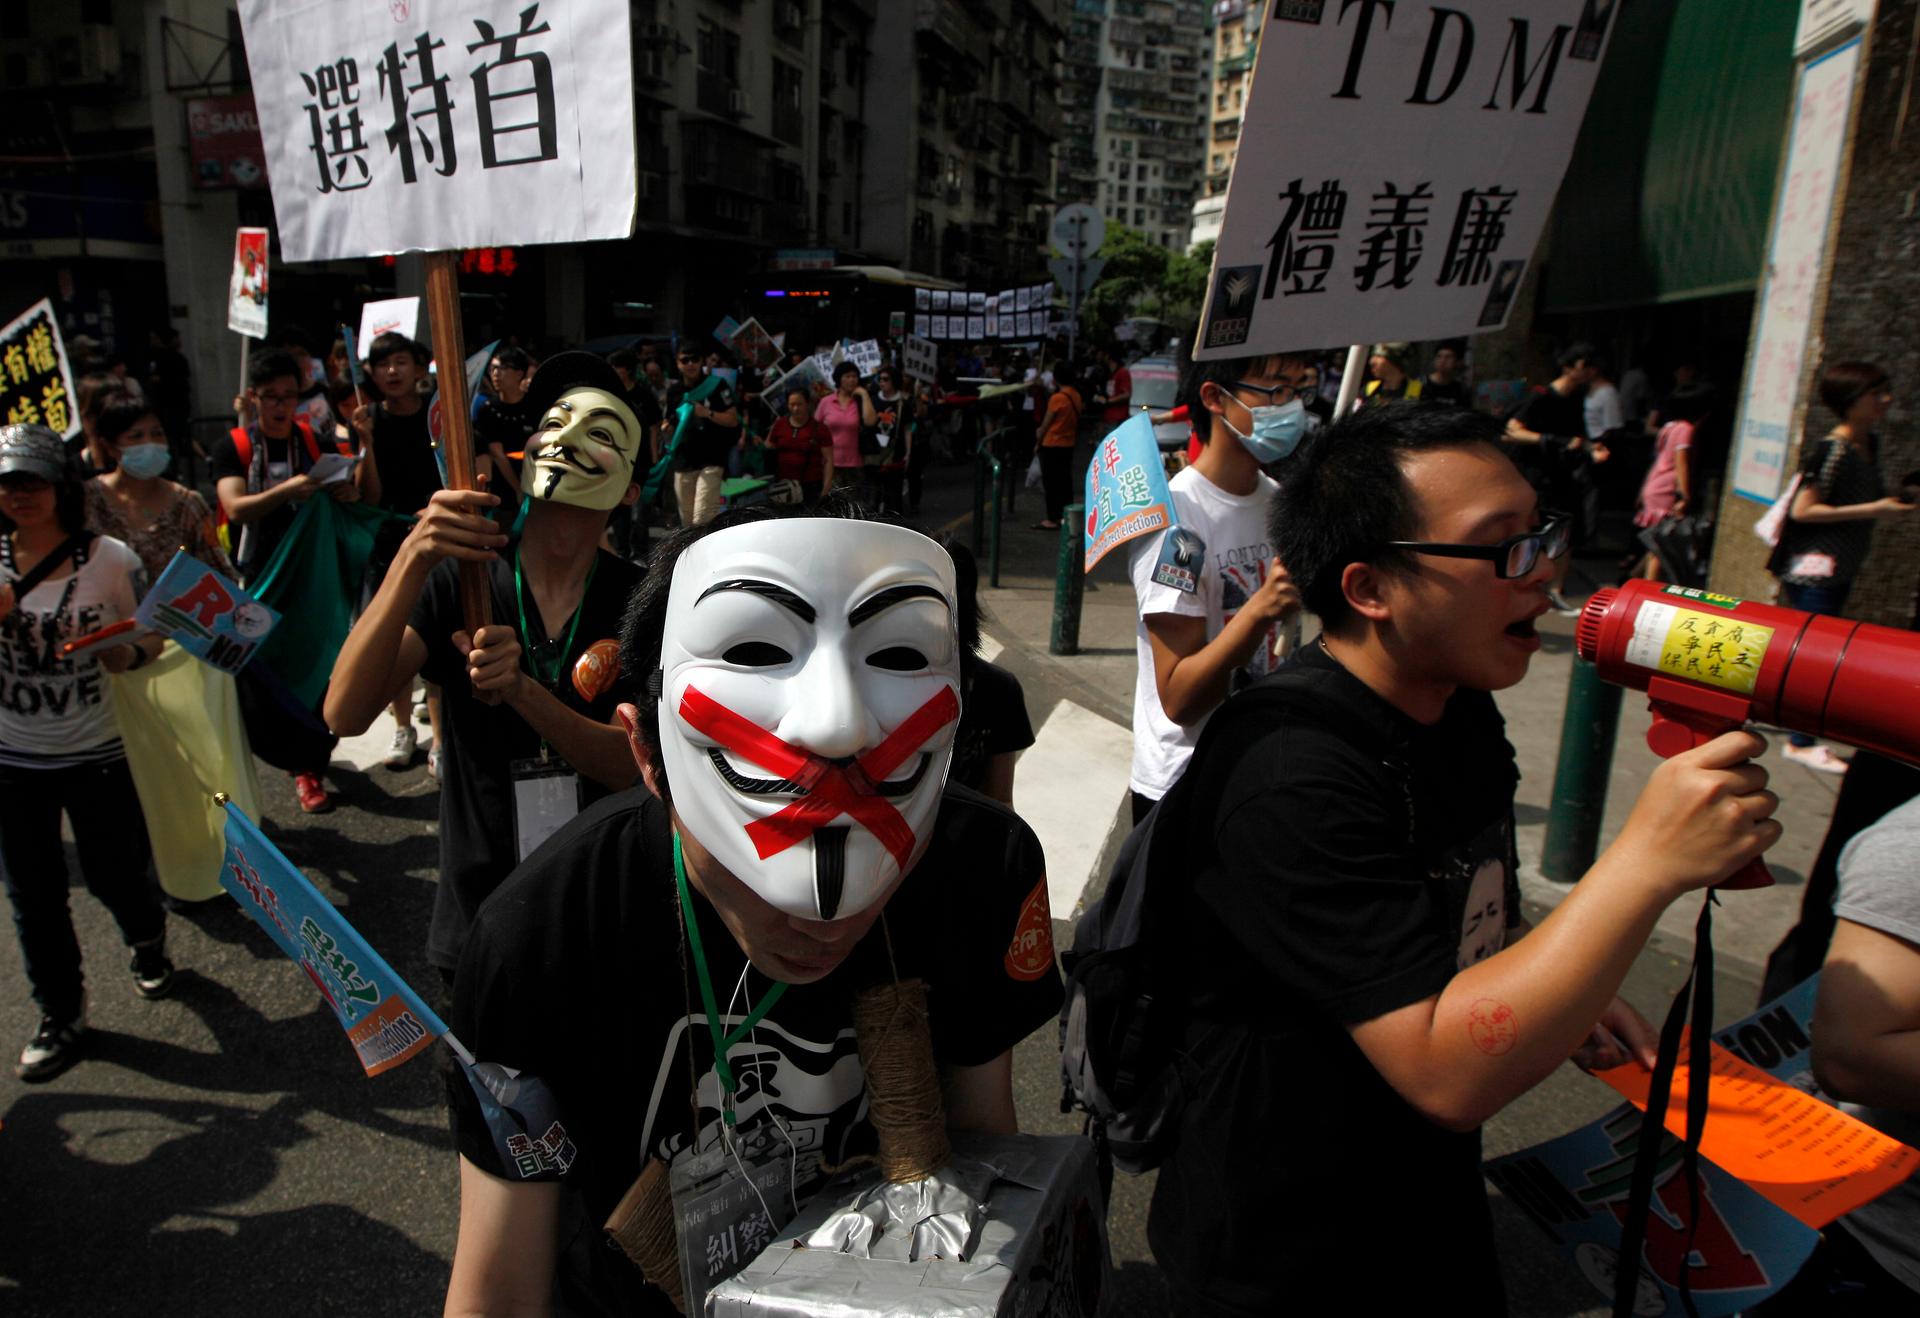 Pro-democracy demonstrators wearing Anonymous masks hold placards during a protest march demanding universal suffrage for Macau on May 1, 2012. The placard reads "Vote for Chief Executive." 